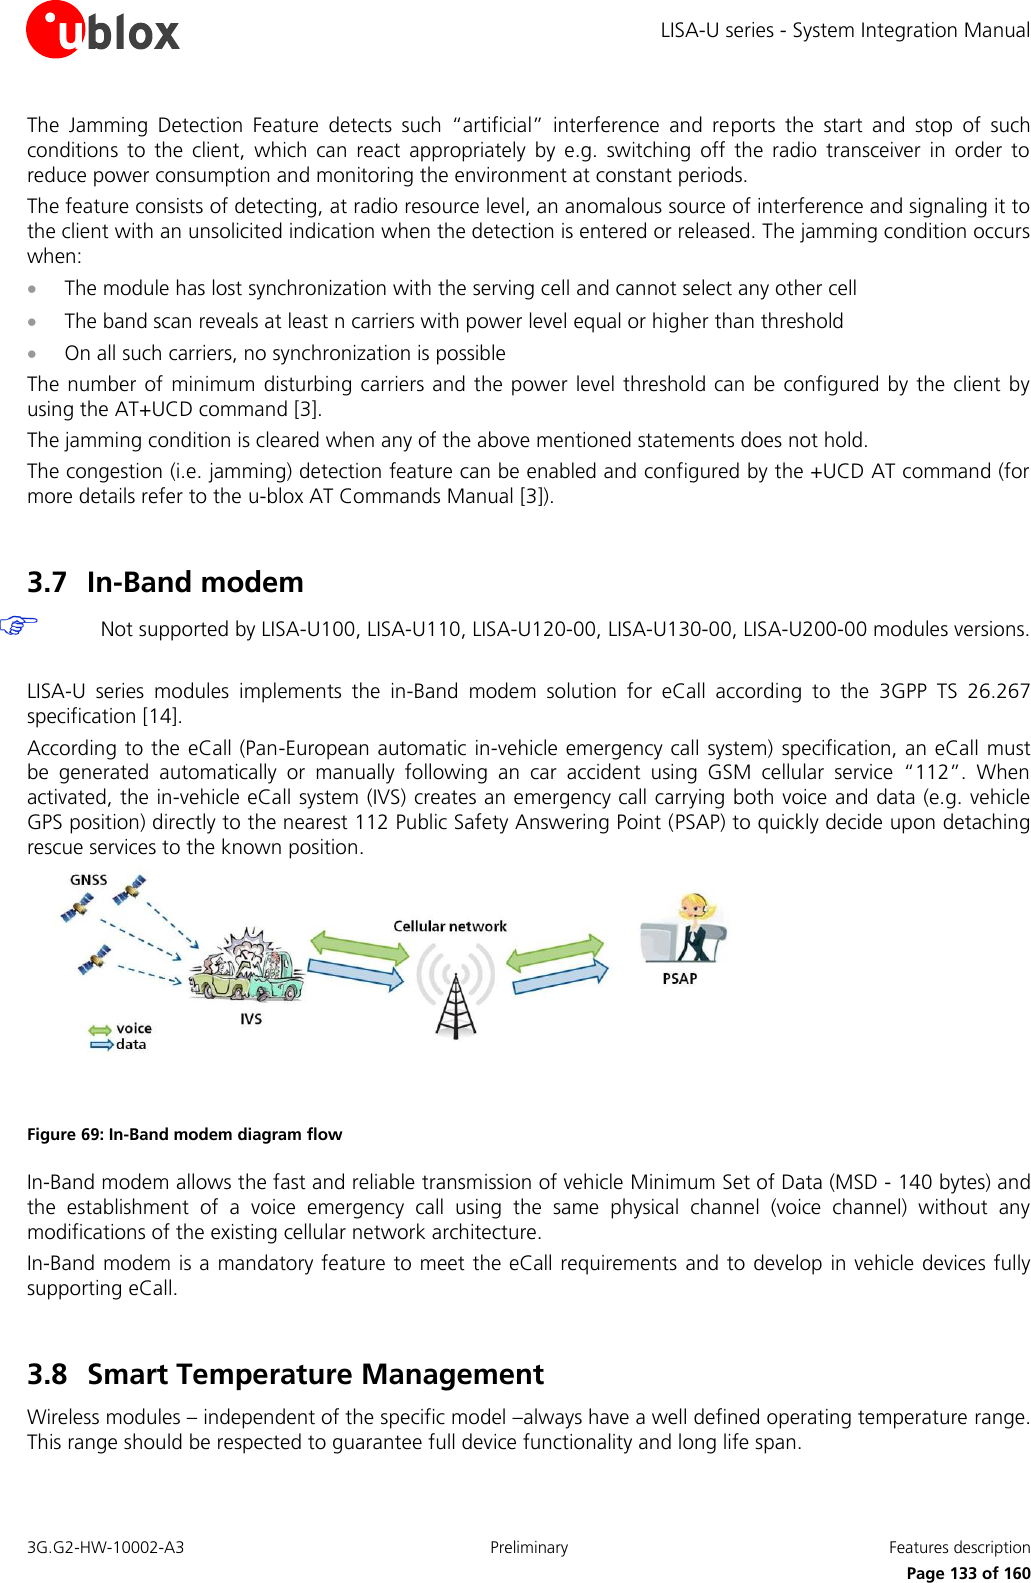 LISA-U series - System Integration Manual 3G.G2-HW-10002-A3  Preliminary  Features description      Page 133 of 160 The  Jamming  Detection  Feature  detects  such  “artificial”  interference  and  reports  the  start  and  stop  of  such conditions  to  the  client,  which  can  react  appropriately  by  e.g.  switching  off  the  radio  transceiver  in  order  to reduce power consumption and monitoring the environment at constant periods. The feature consists of detecting, at radio resource level, an anomalous source of interference and signaling it to the client with an unsolicited indication when the detection is entered or released. The jamming condition occurs when:  The module has lost synchronization with the serving cell and cannot select any other cell  The band scan reveals at least n carriers with power level equal or higher than threshold  On all such carriers, no synchronization is possible The number of  minimum disturbing carriers and the power level threshold can be configured by the client  by using the AT+UCD command [3]. The jamming condition is cleared when any of the above mentioned statements does not hold. The congestion (i.e. jamming) detection feature can be enabled and configured by the +UCD AT command (for more details refer to the u-blox AT Commands Manual [3]).  3.7 In-Band modem  Not supported by LISA-U100, LISA-U110, LISA-U120-00, LISA-U130-00, LISA-U200-00 modules versions.  LISA-U  series  modules  implements  the  in-Band  modem  solution  for  eCall  according  to  the  3GPP  TS  26.267 specification [14]. According to the eCall (Pan-European automatic in-vehicle emergency call system)  specification, an eCall must be  generated  automatically  or  manually  following  an  car  accident  using  GSM  cellular  service  “112”.  When activated, the in-vehicle eCall system (IVS) creates an emergency call carrying both voice and data (e.g. vehicle GPS position) directly to the nearest 112 Public Safety Answering Point (PSAP) to quickly decide upon detaching rescue services to the known position.  Figure 69: In-Band modem diagram flow In-Band modem allows the fast and reliable transmission of vehicle Minimum Set of Data (MSD - 140 bytes) and the  establishment  of  a  voice  emergency  call  using  the  same  physical  channel  (voice  channel)  without  any modifications of the existing cellular network architecture. In-Band modem is a mandatory feature to meet the eCall requirements and to develop in vehicle devices fully supporting eCall.  3.8 Smart Temperature Management  Wireless modules – independent of the specific model –always have a well defined operating temperature range. This range should be respected to guarantee full device functionality and long life span. 